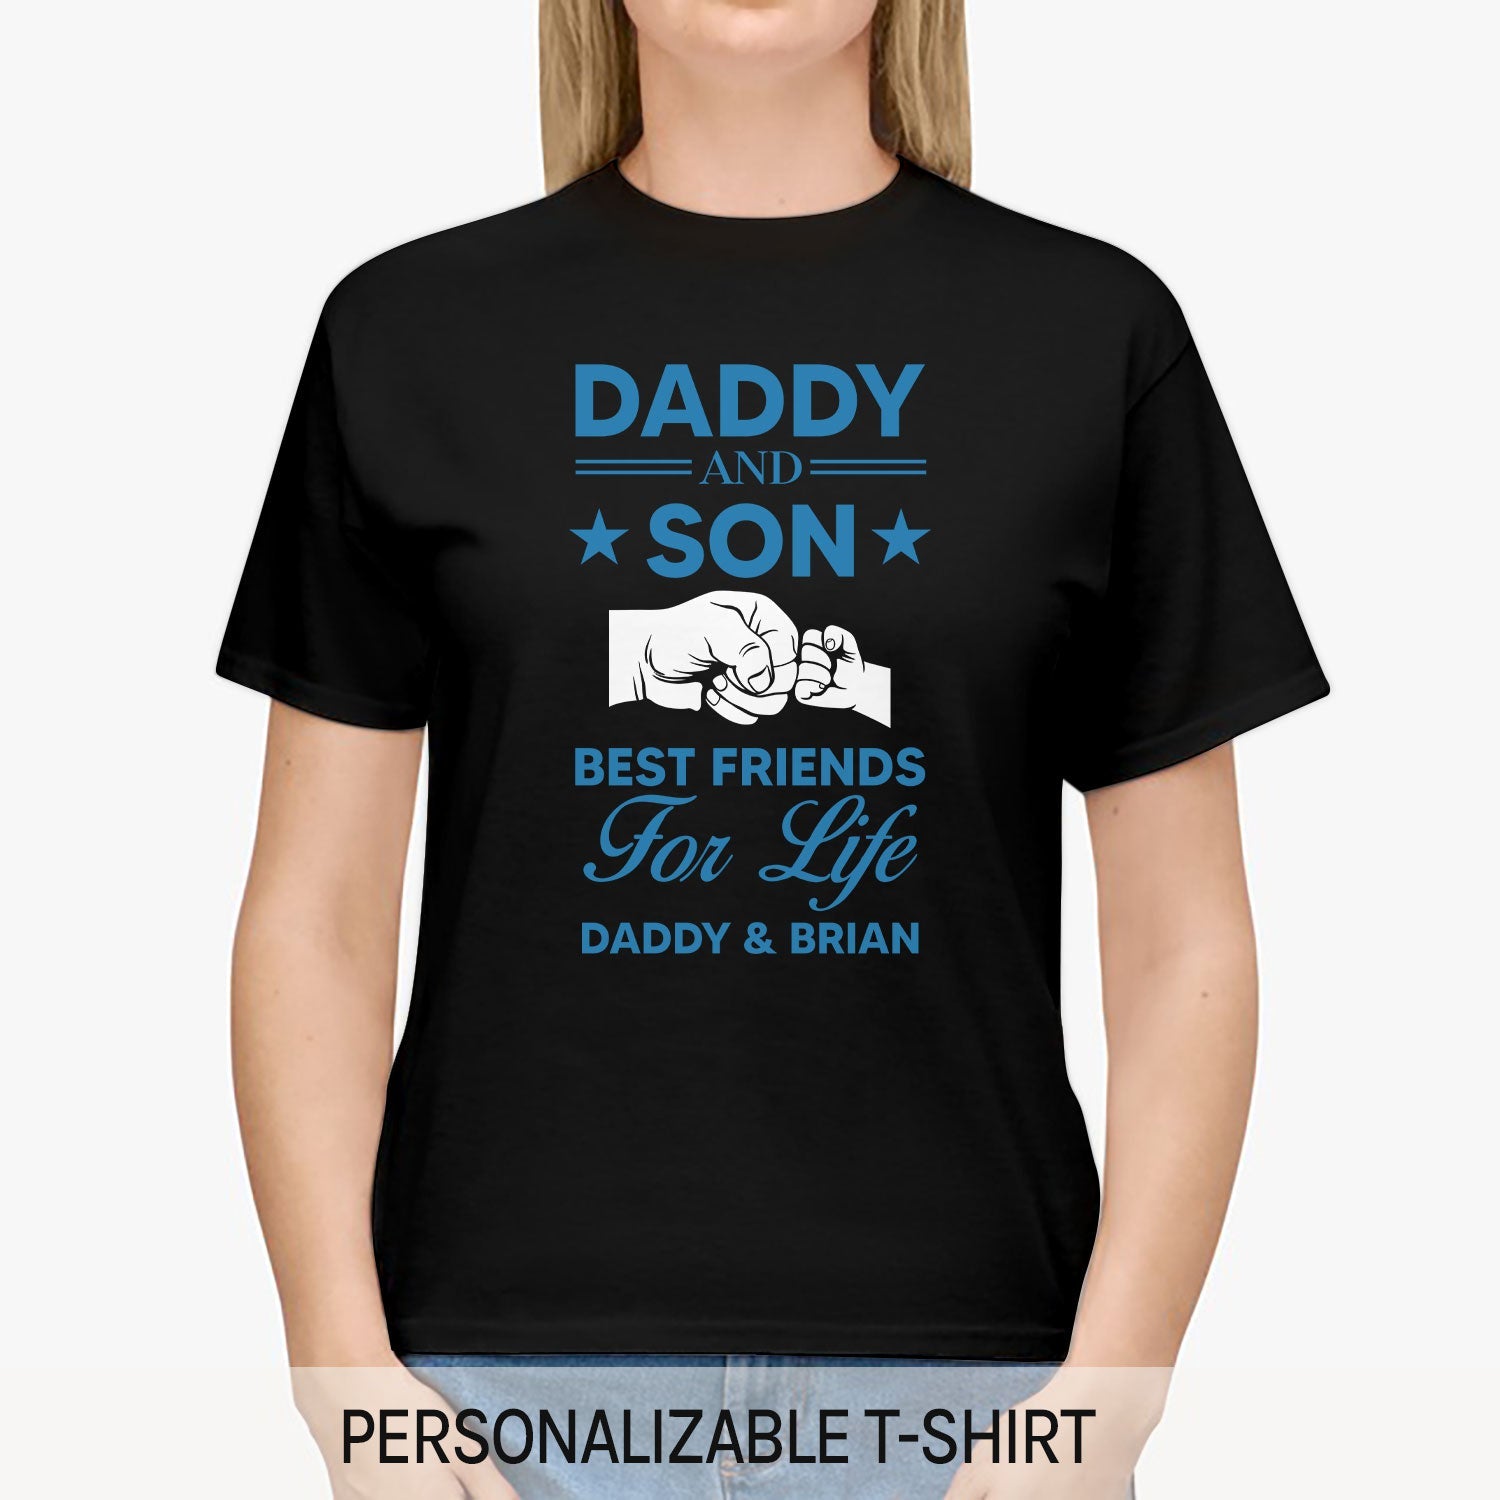 Daddy And Son Best Friends For Life - Personalized  gift Father Son - Custom Tshirt - MyMindfulGifts